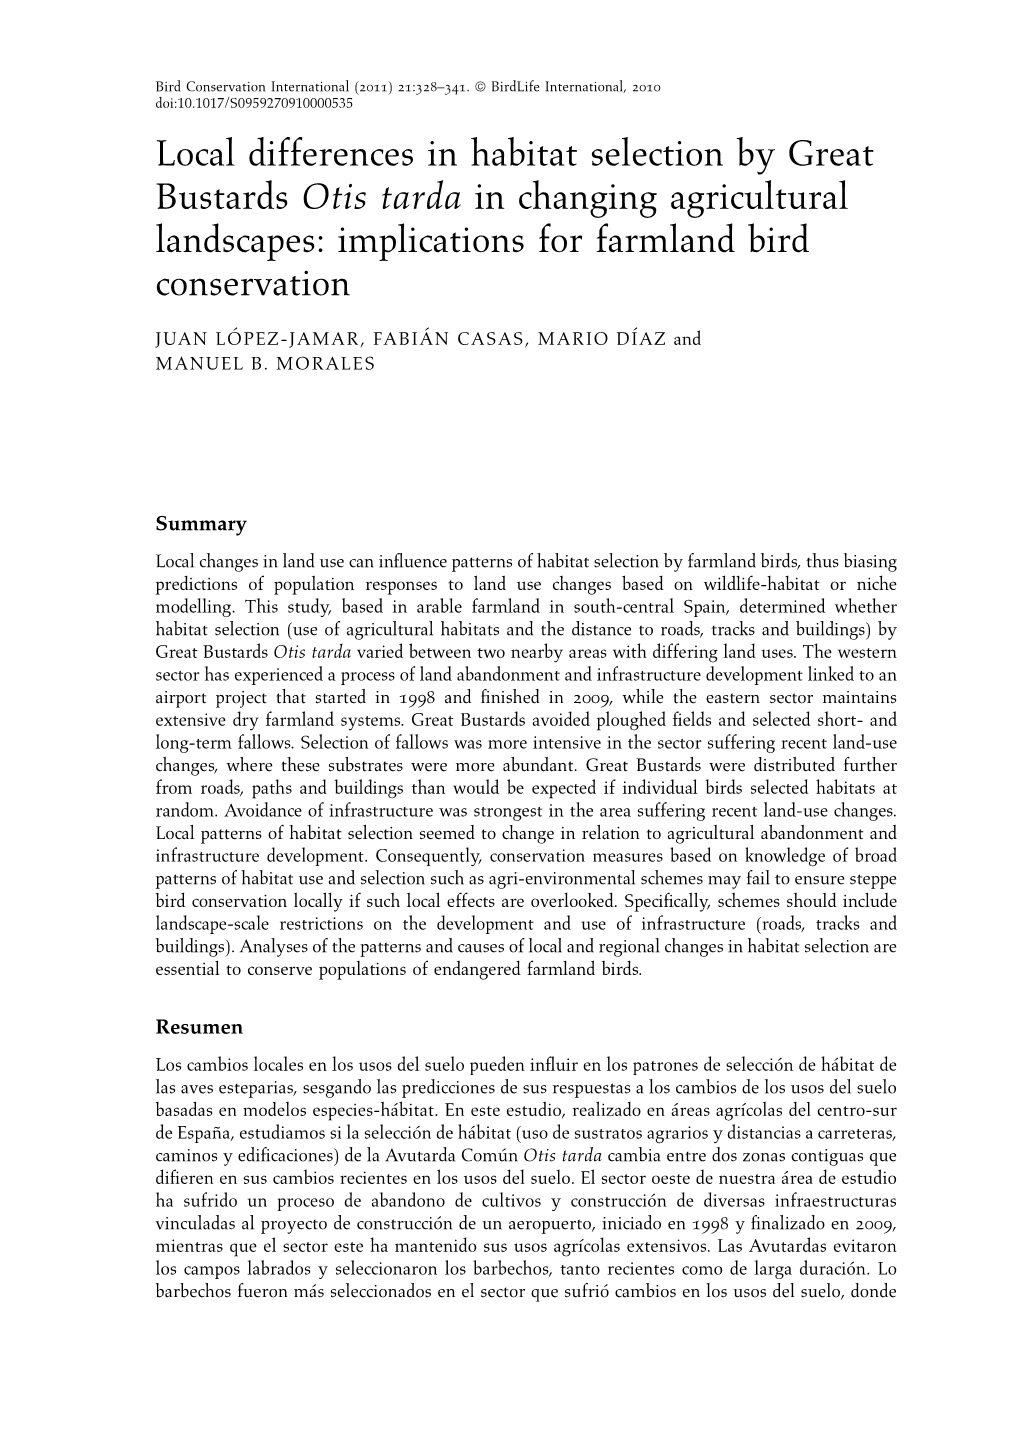 Local Differences in Habitat Selection by Great Bustards Otis Tarda in Changing Agricultural Landscapes: Implications for Farmland Bird Conservation